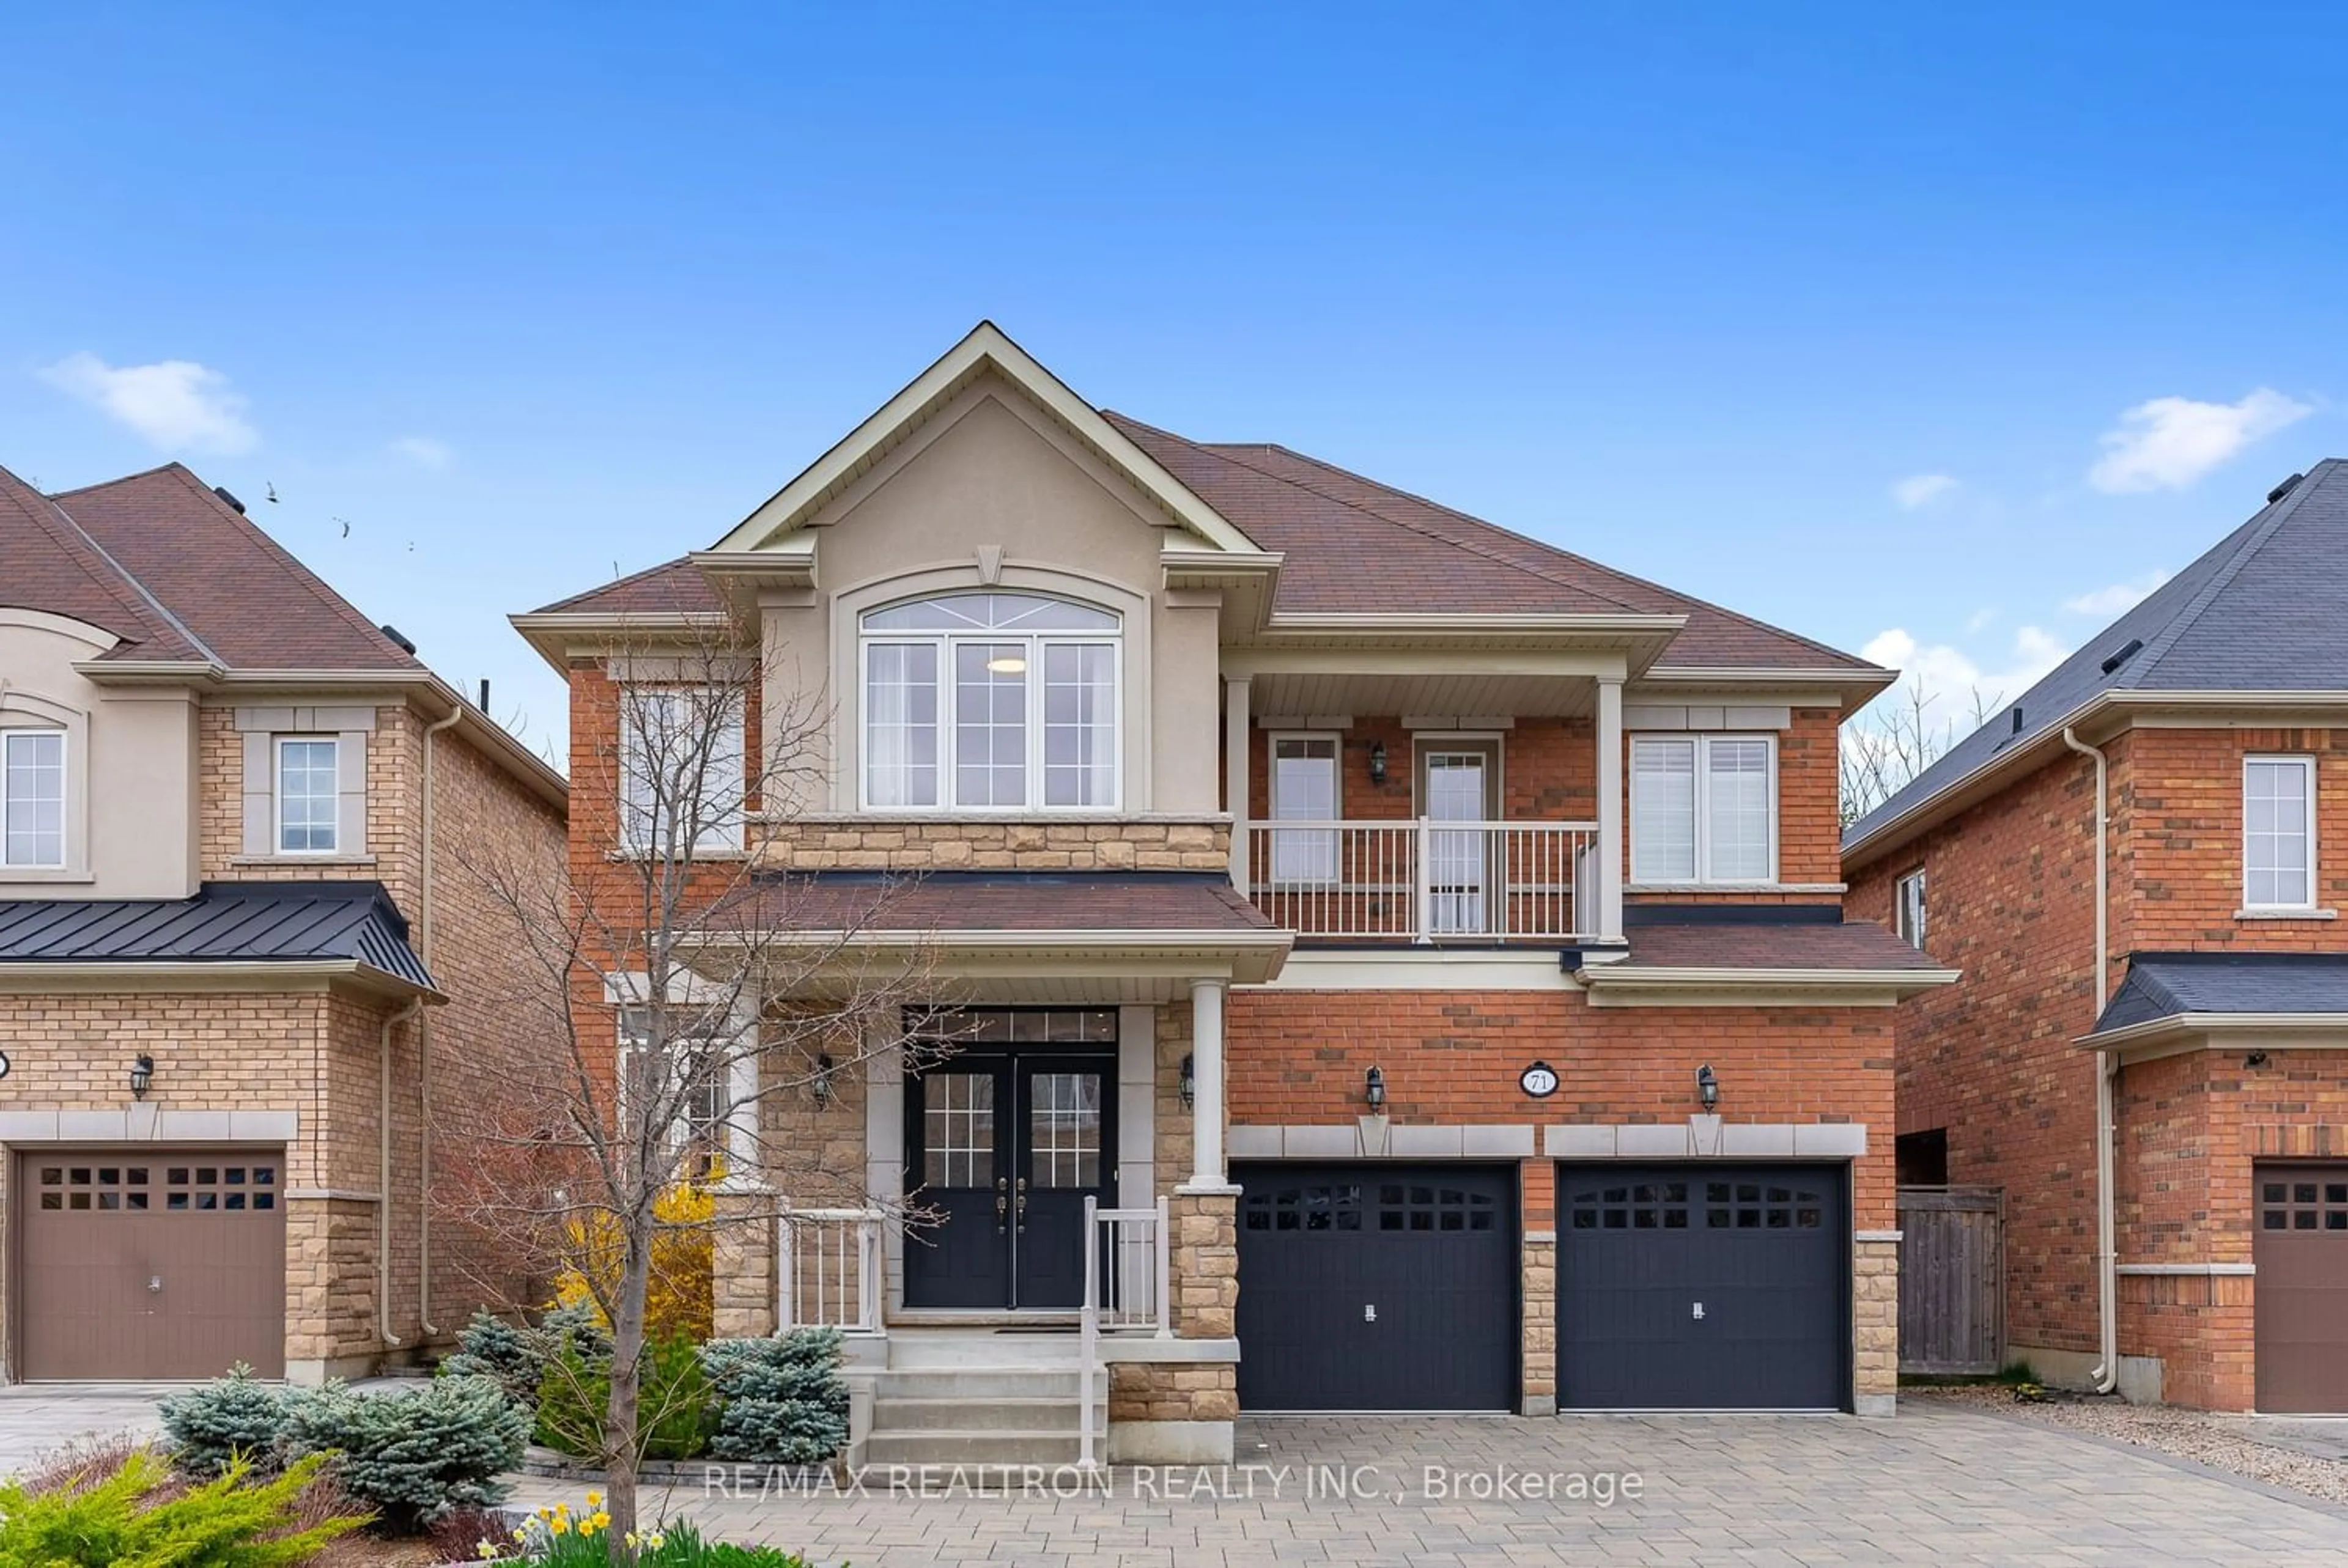 Home with brick exterior material for 71 Ironbark Crt, Vaughan Ontario L6A 4S6